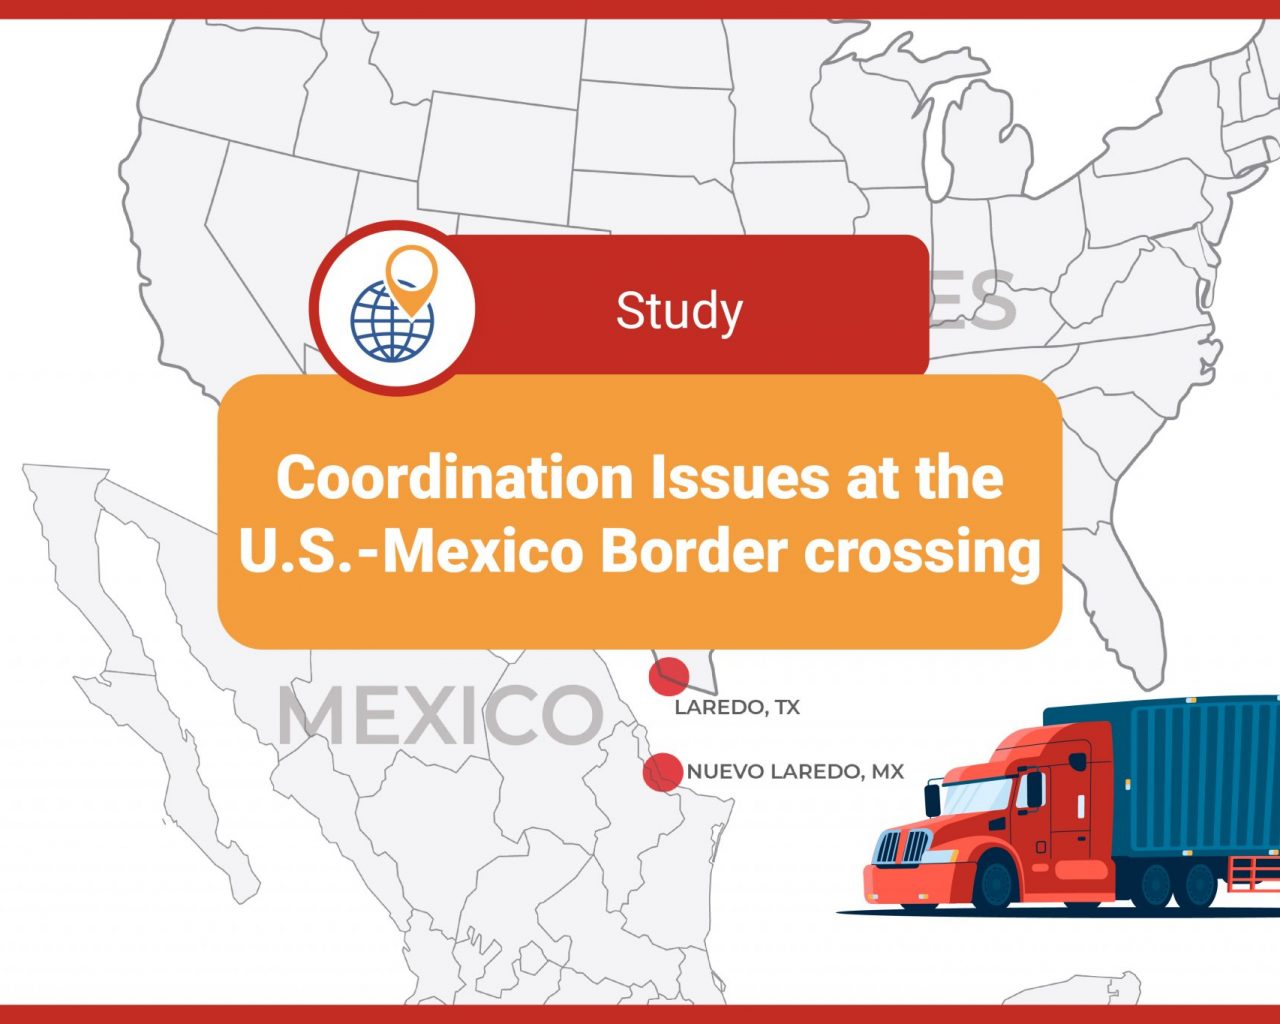 Main coordination problems that compromise the efficiency and integrity of the U.S. – Mexico border crossing - according to the TEXAS TRANSPORTATION INSTITUTE